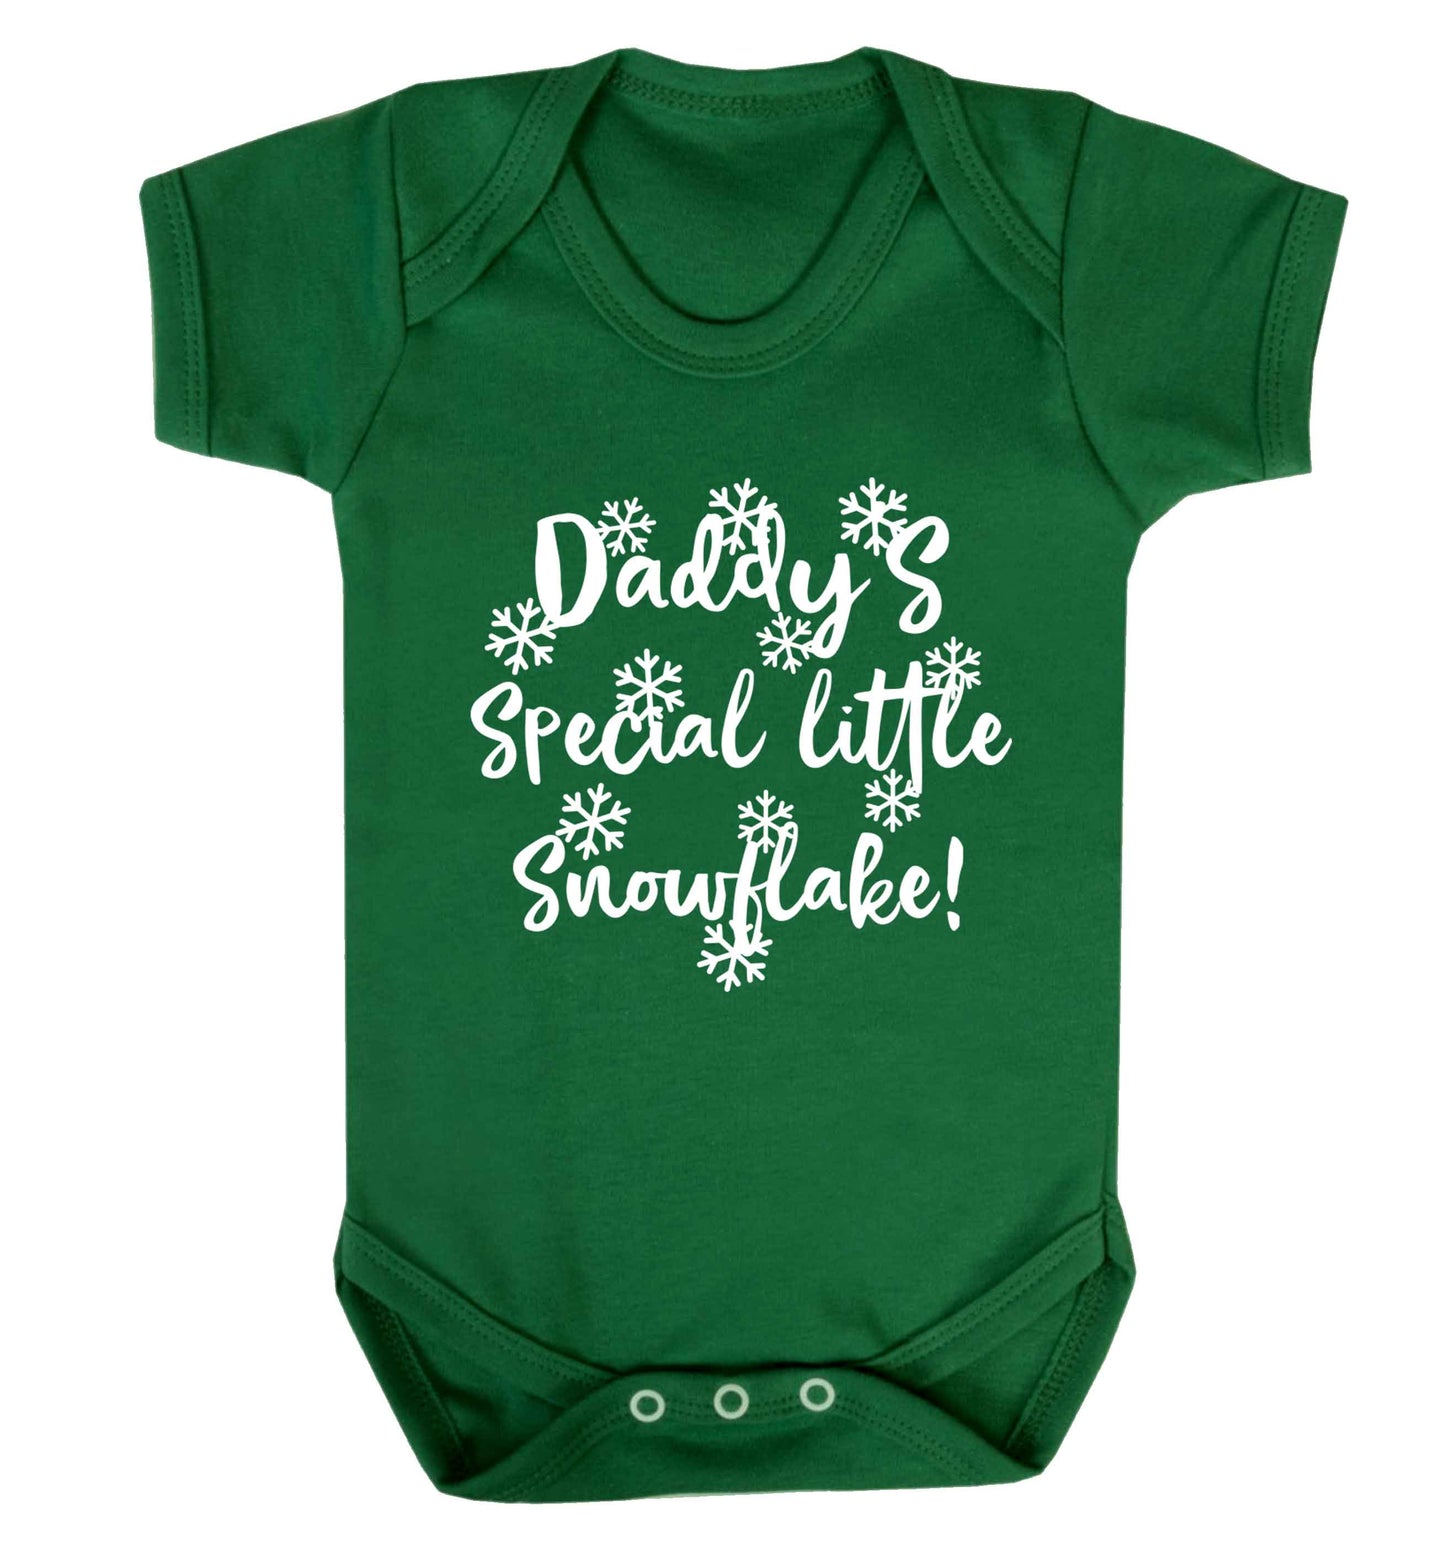 Daddy's special little snowflake Baby Vest green 18-24 months